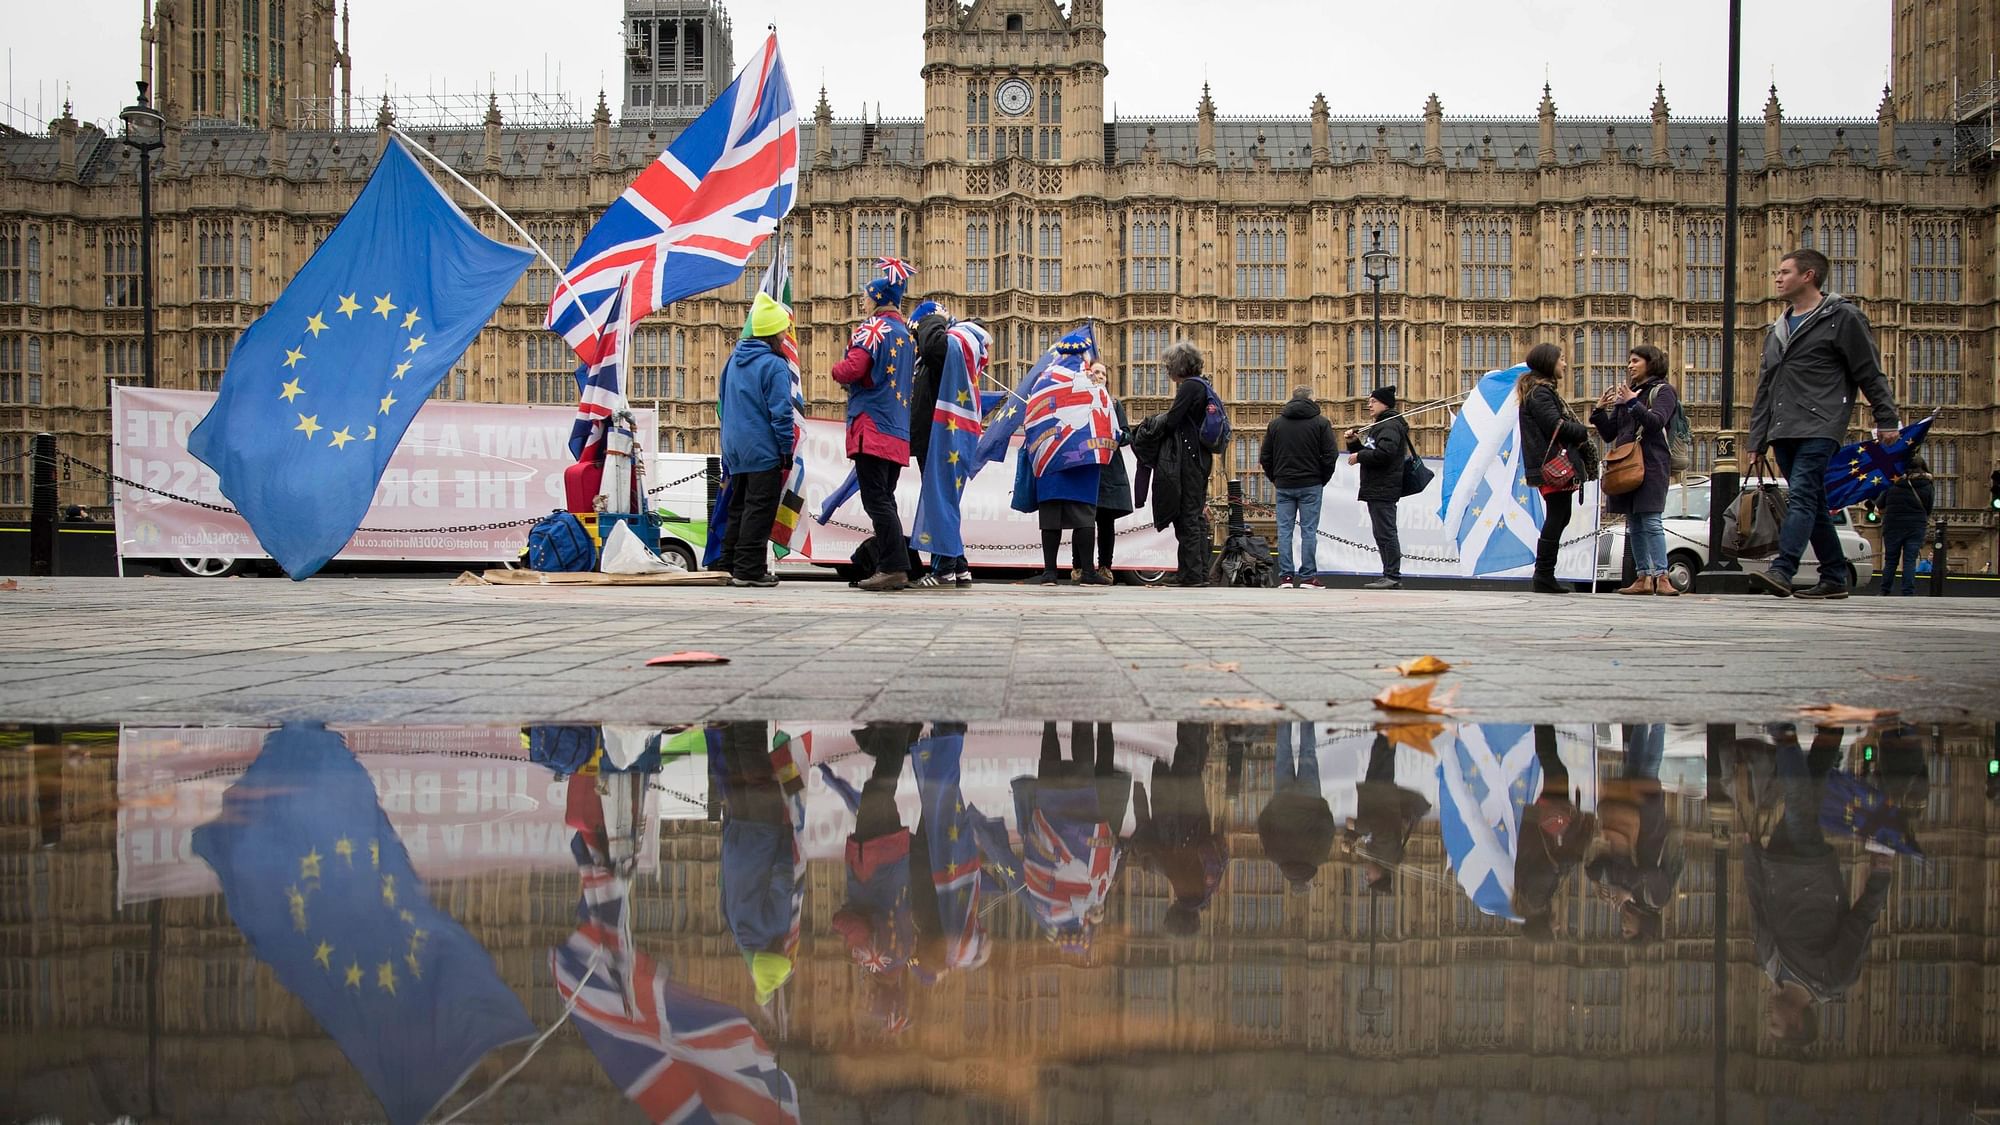 Anti Brexit demonstrators protest outside the Houses of Parliament in London Thursday 6 Dec 2018. Image used for representation.